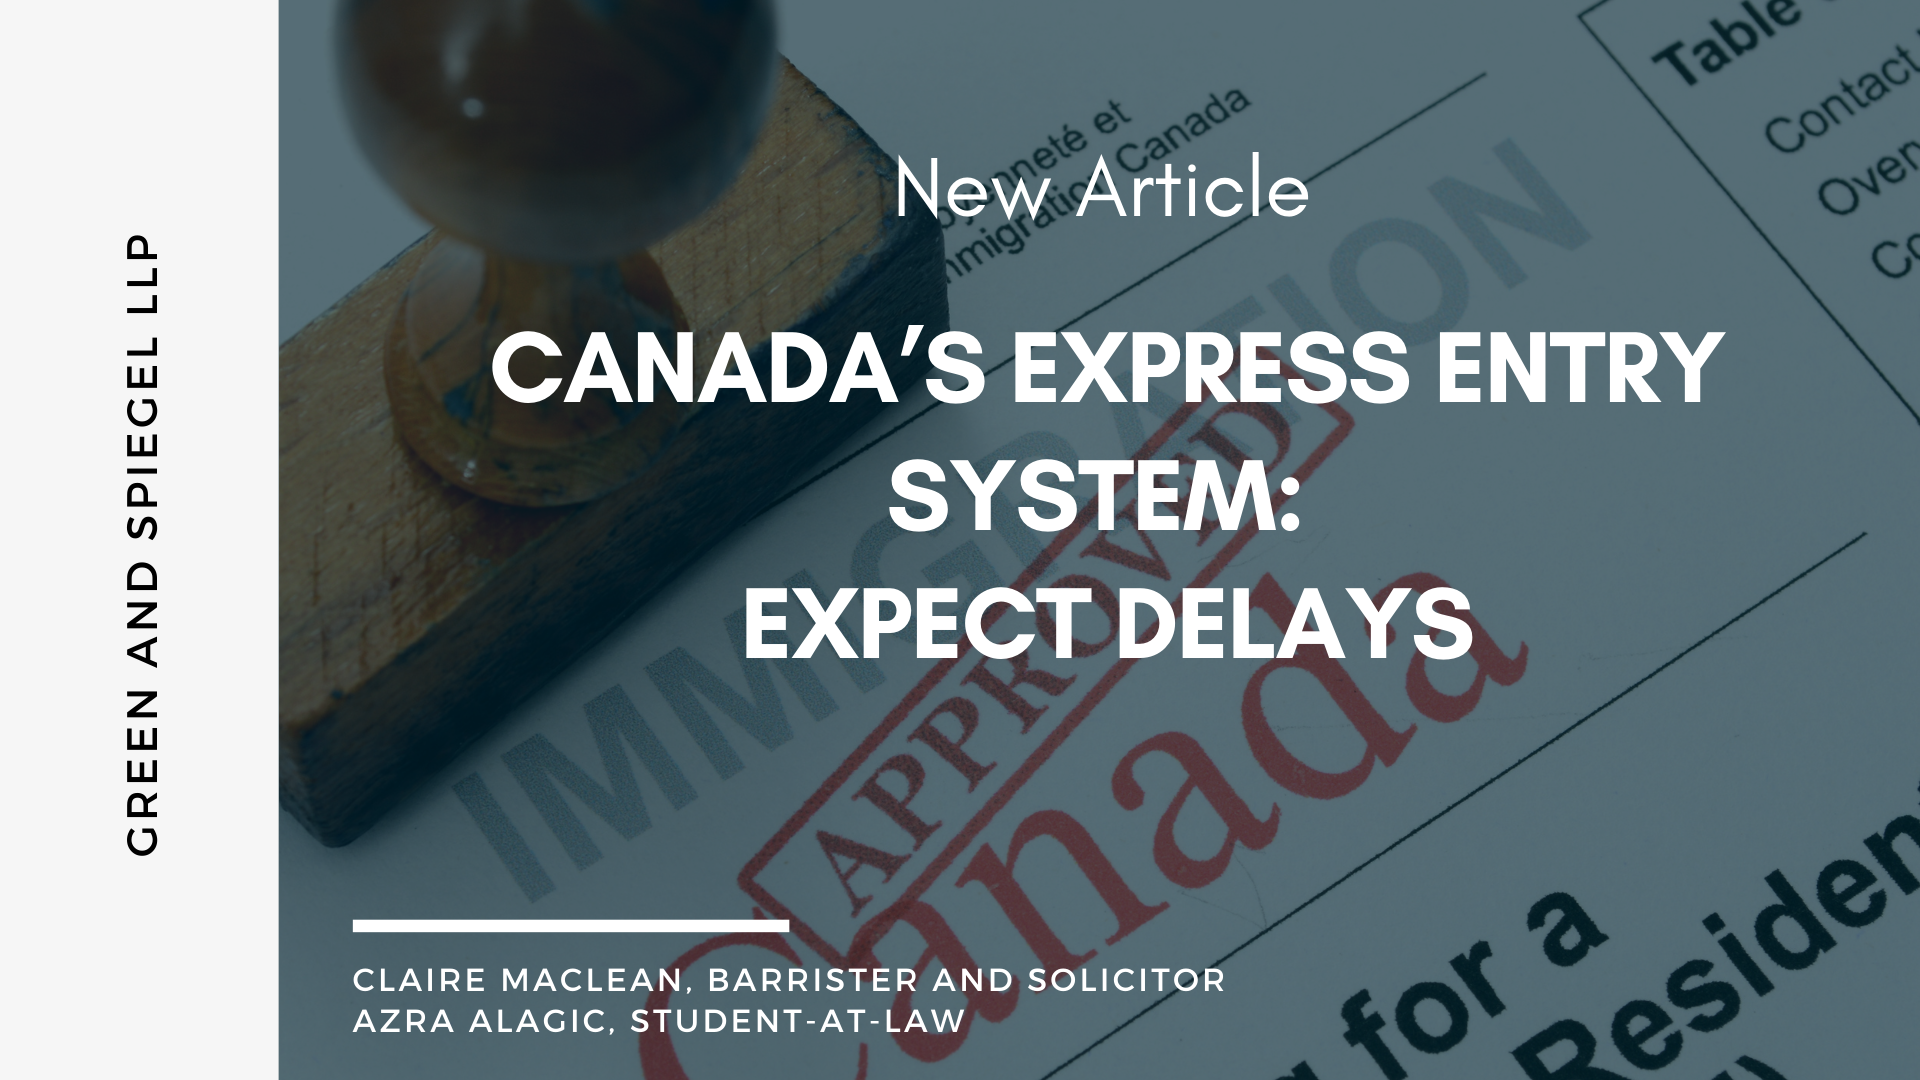 CANADA’S EXPRESS ENTRY SYSTEM: EXPECT DELAYS